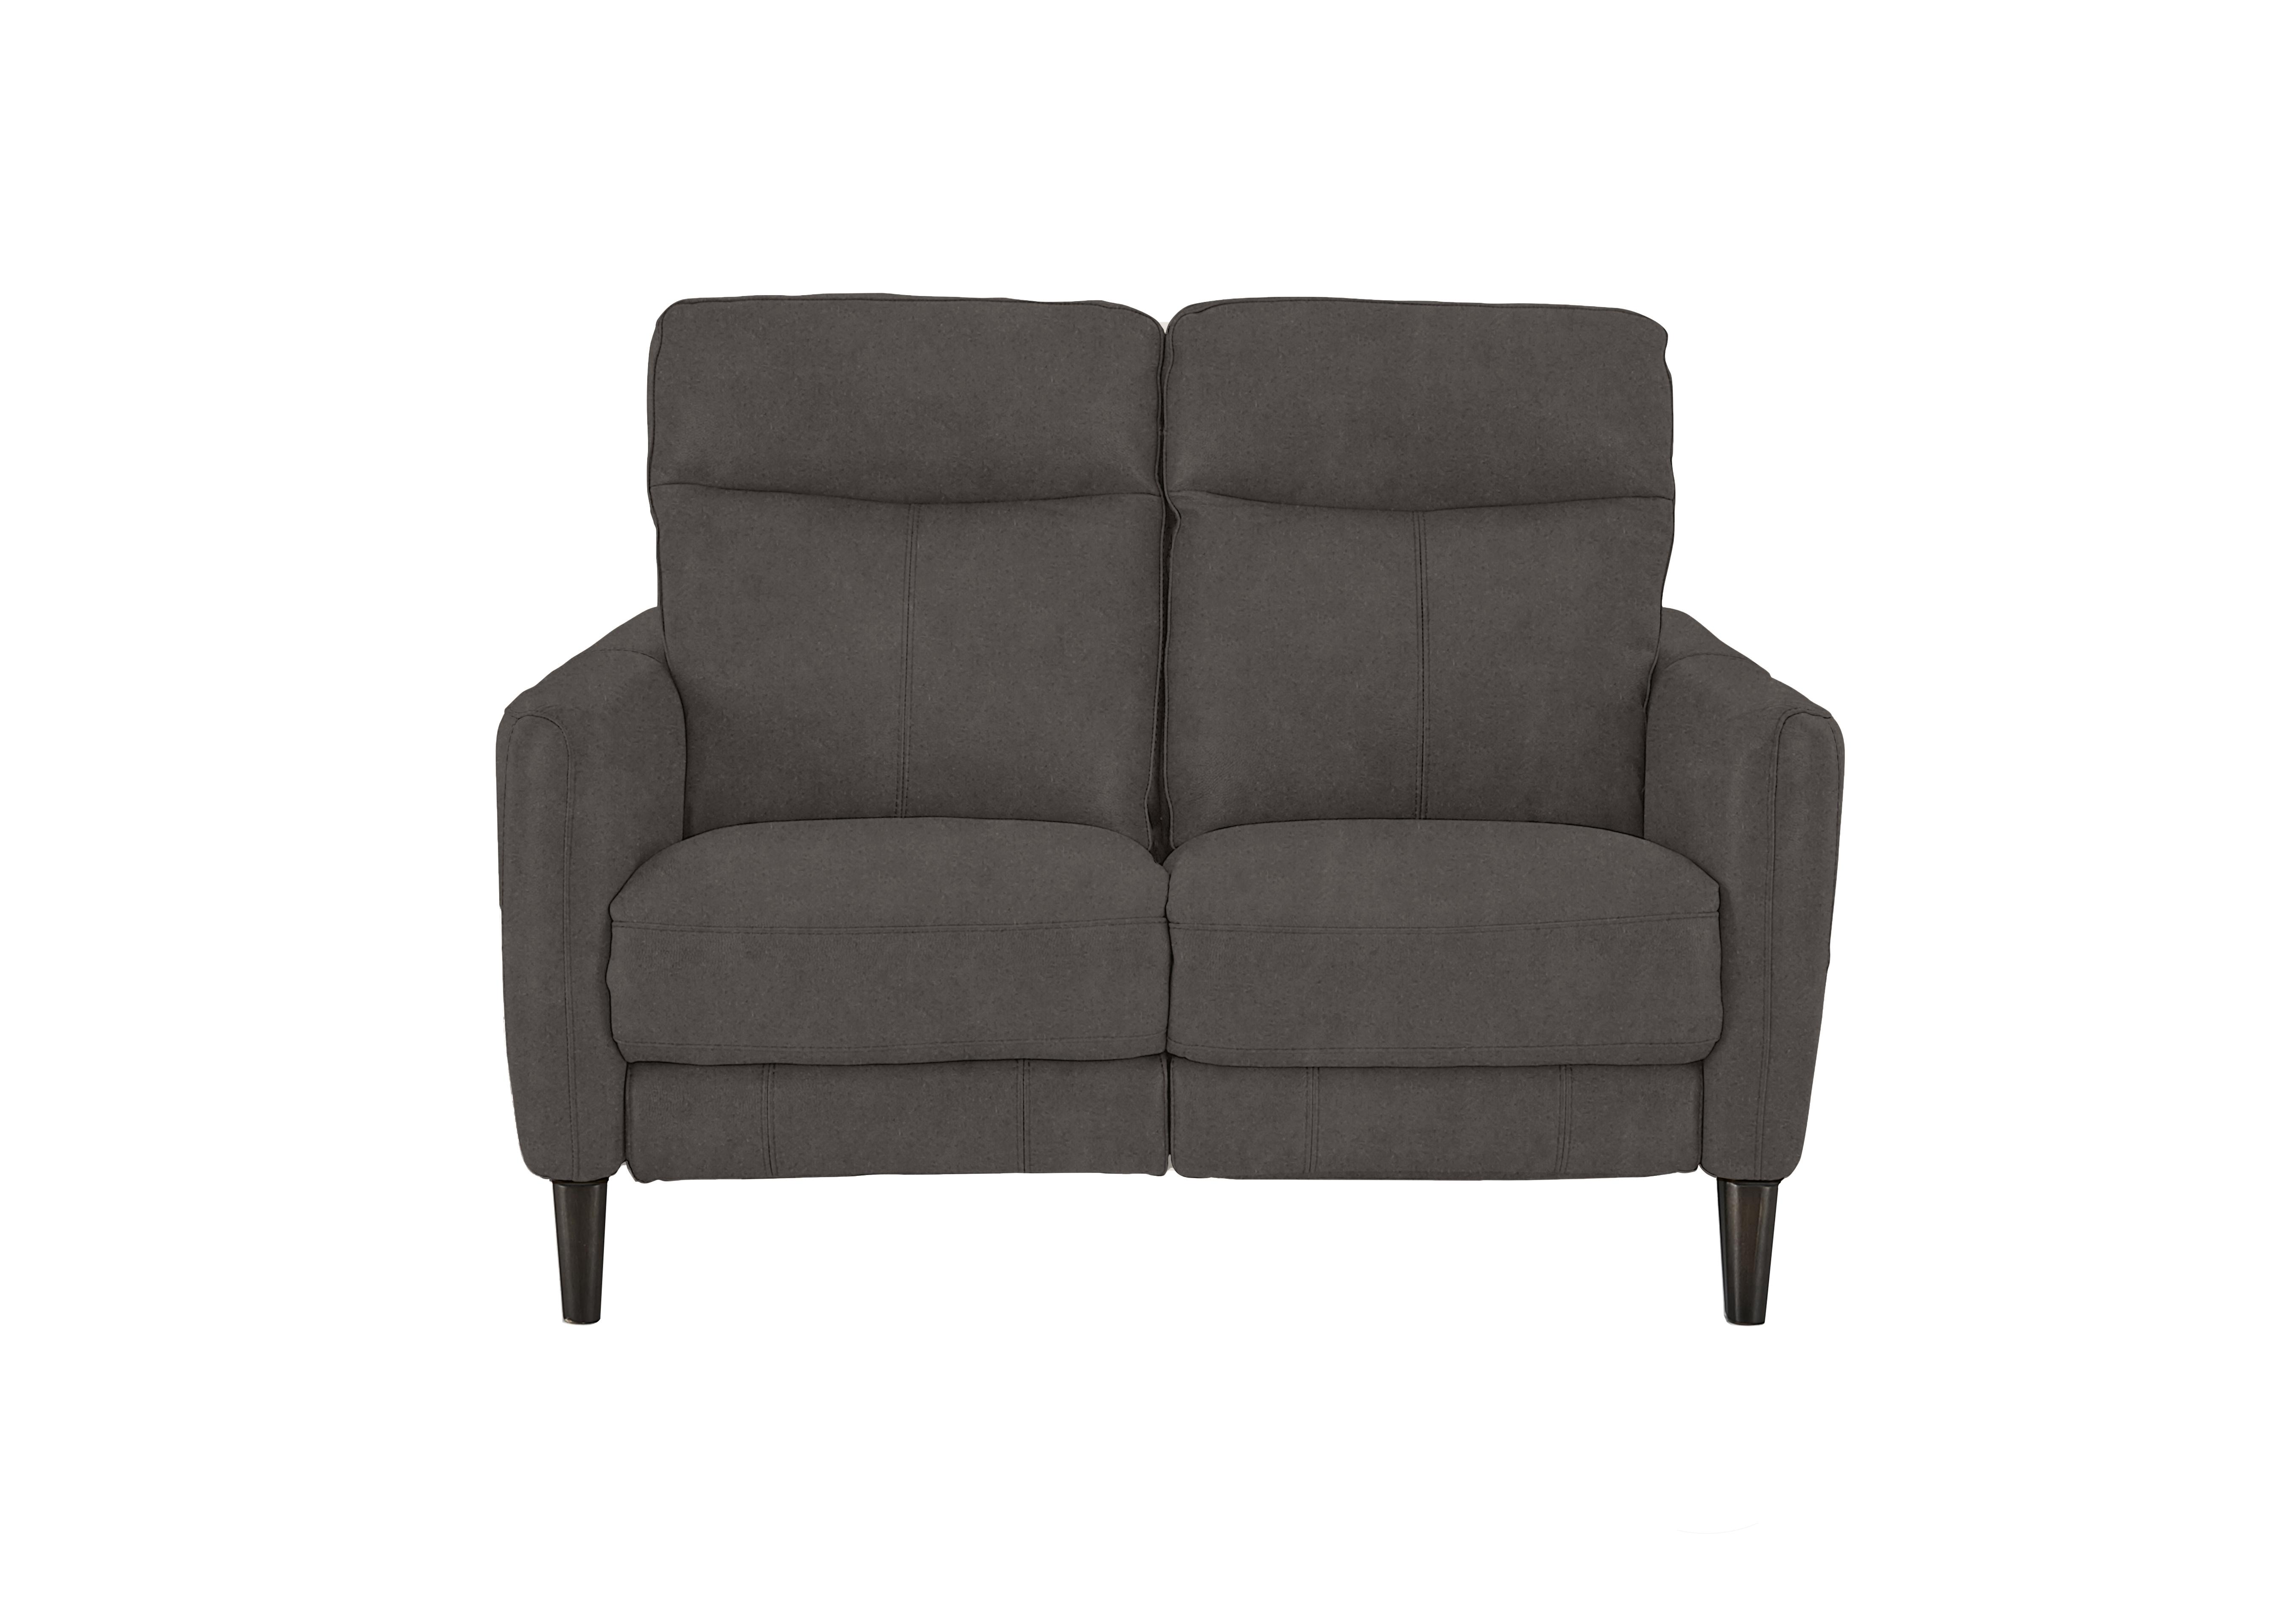 Compact Collection Petit 2 Seater Fabric Sofa in Bfa-Blj-R16 Grey on Furniture Village